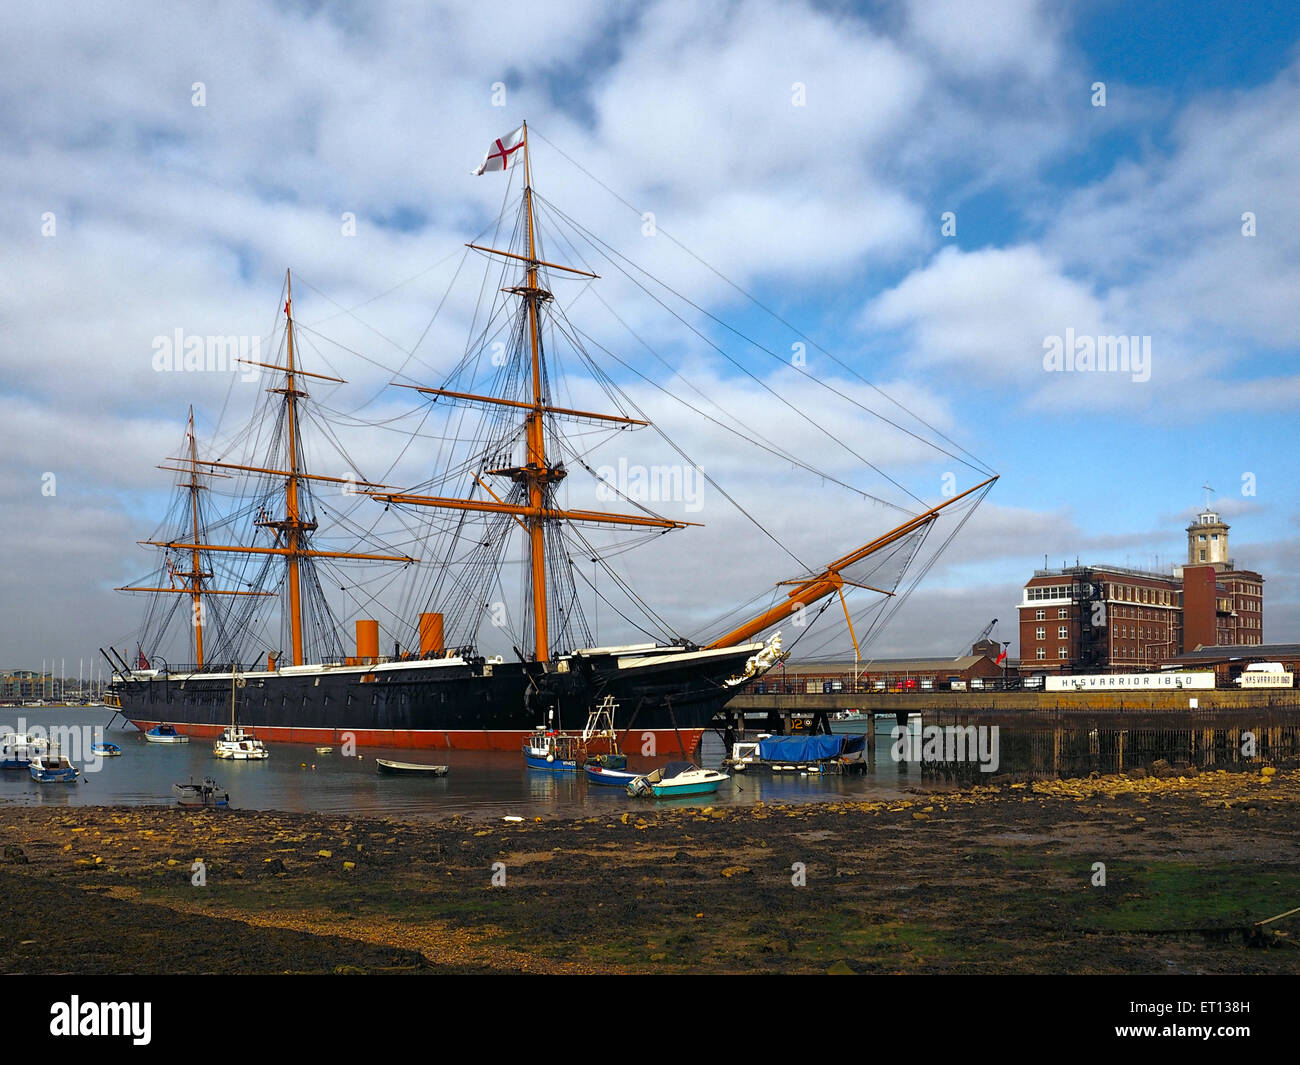 The Warrior steel hulled warship in Portsmouth Stock Photo